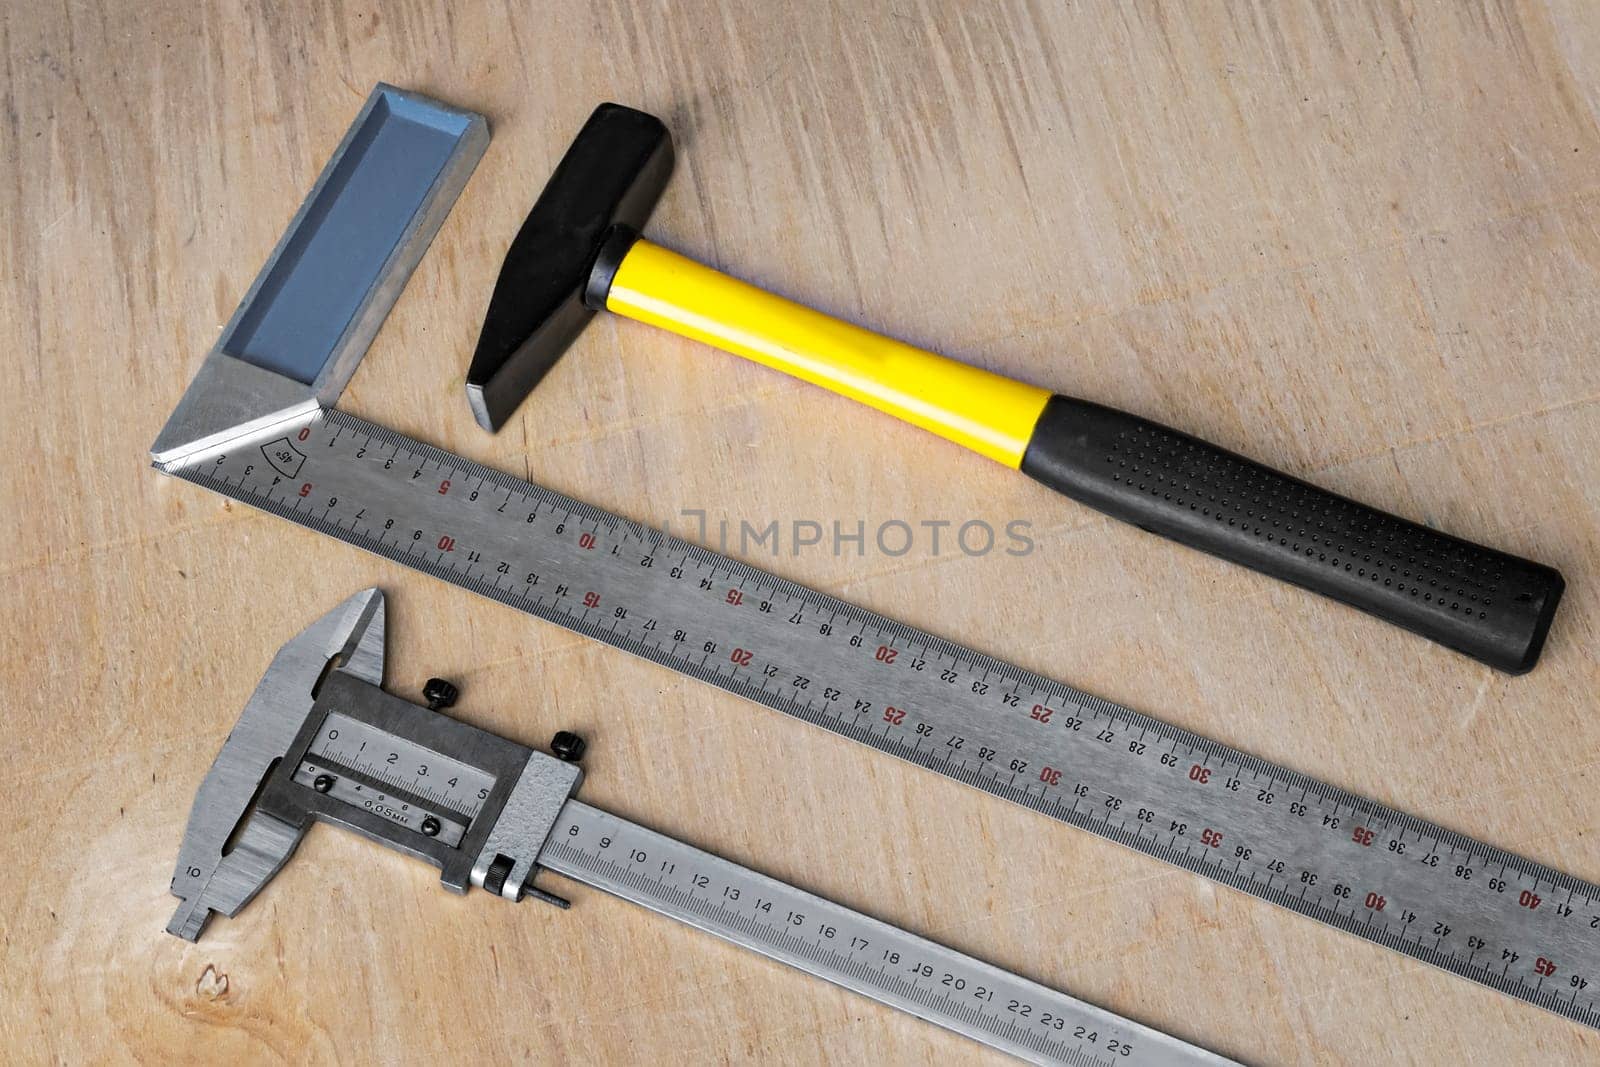 On the table prepared to work tools: hammer, square, ruler, caliper